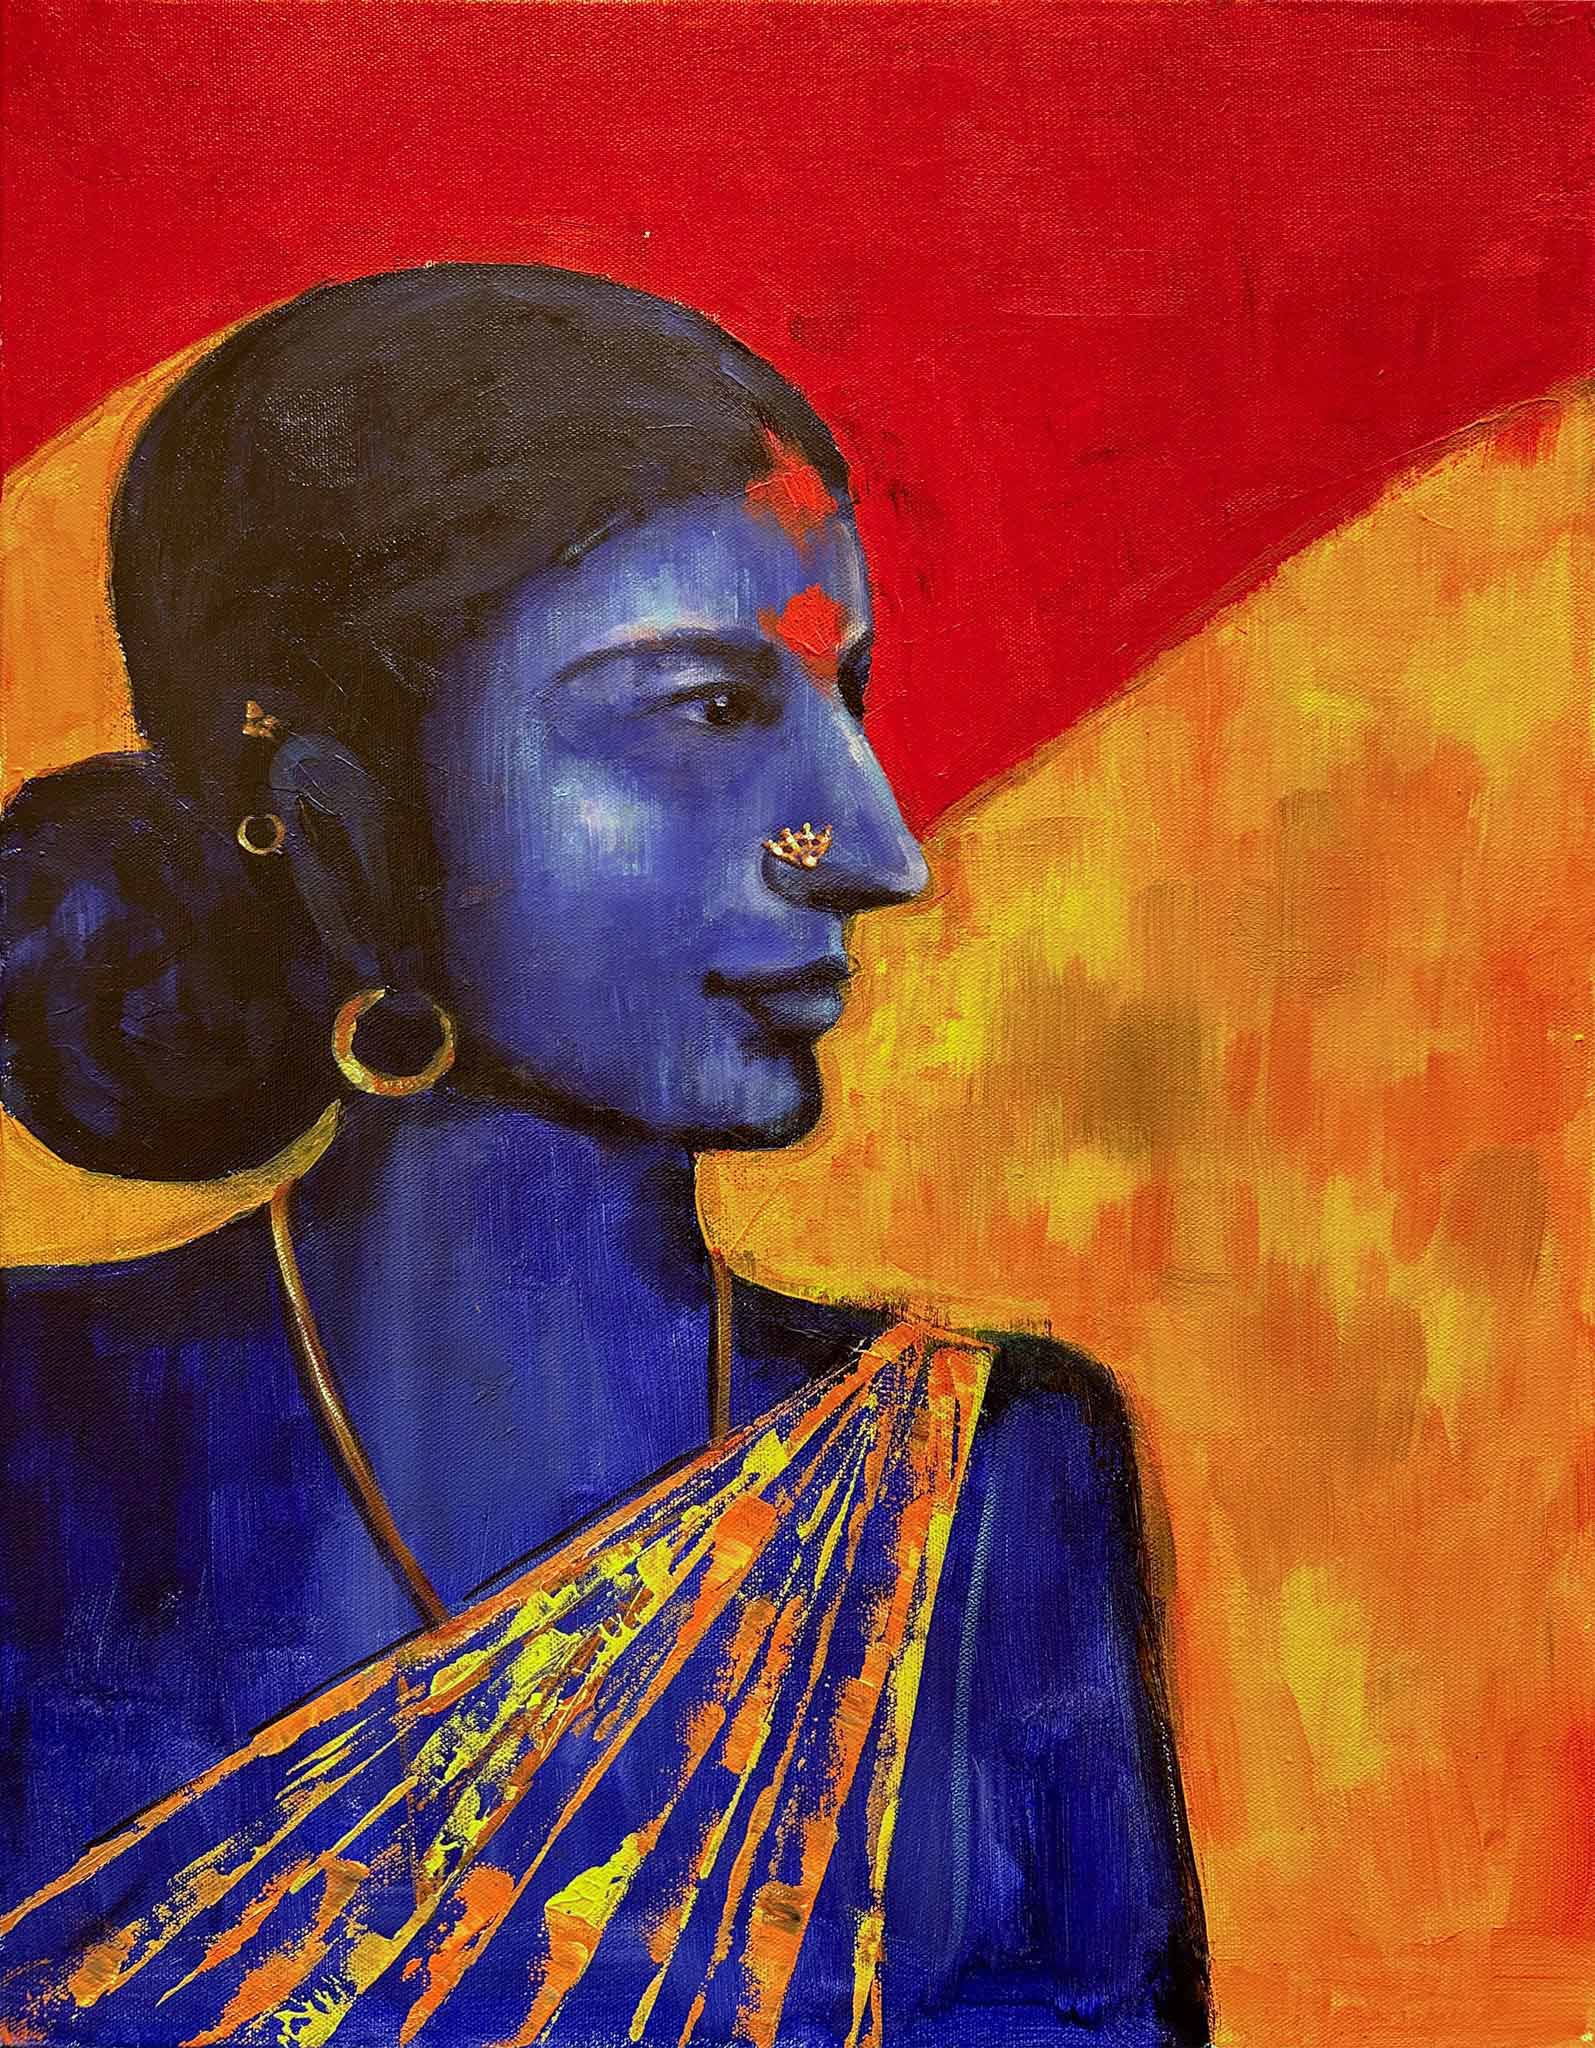 Ode to the Indian woman